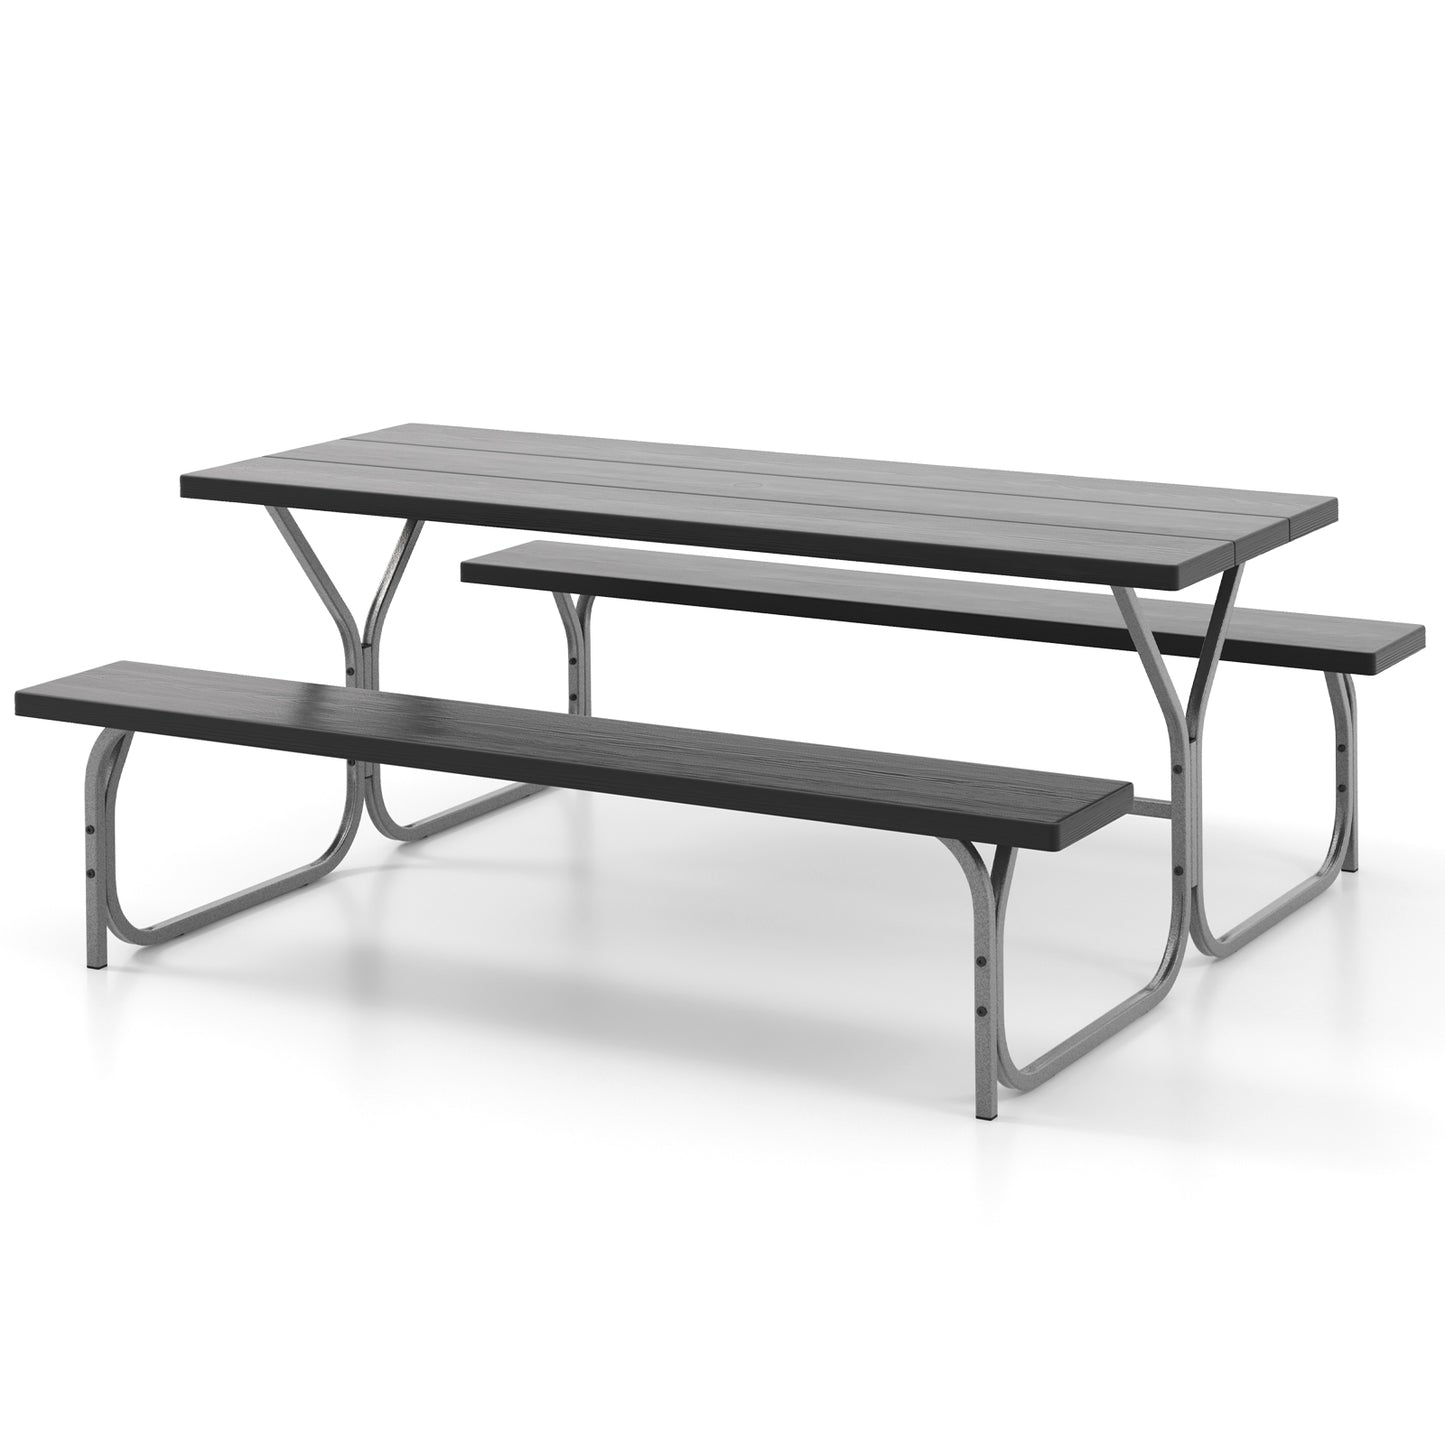 6 Feet Picnic Table Bench Set with HDPE Tabletop for 8 Person-Black